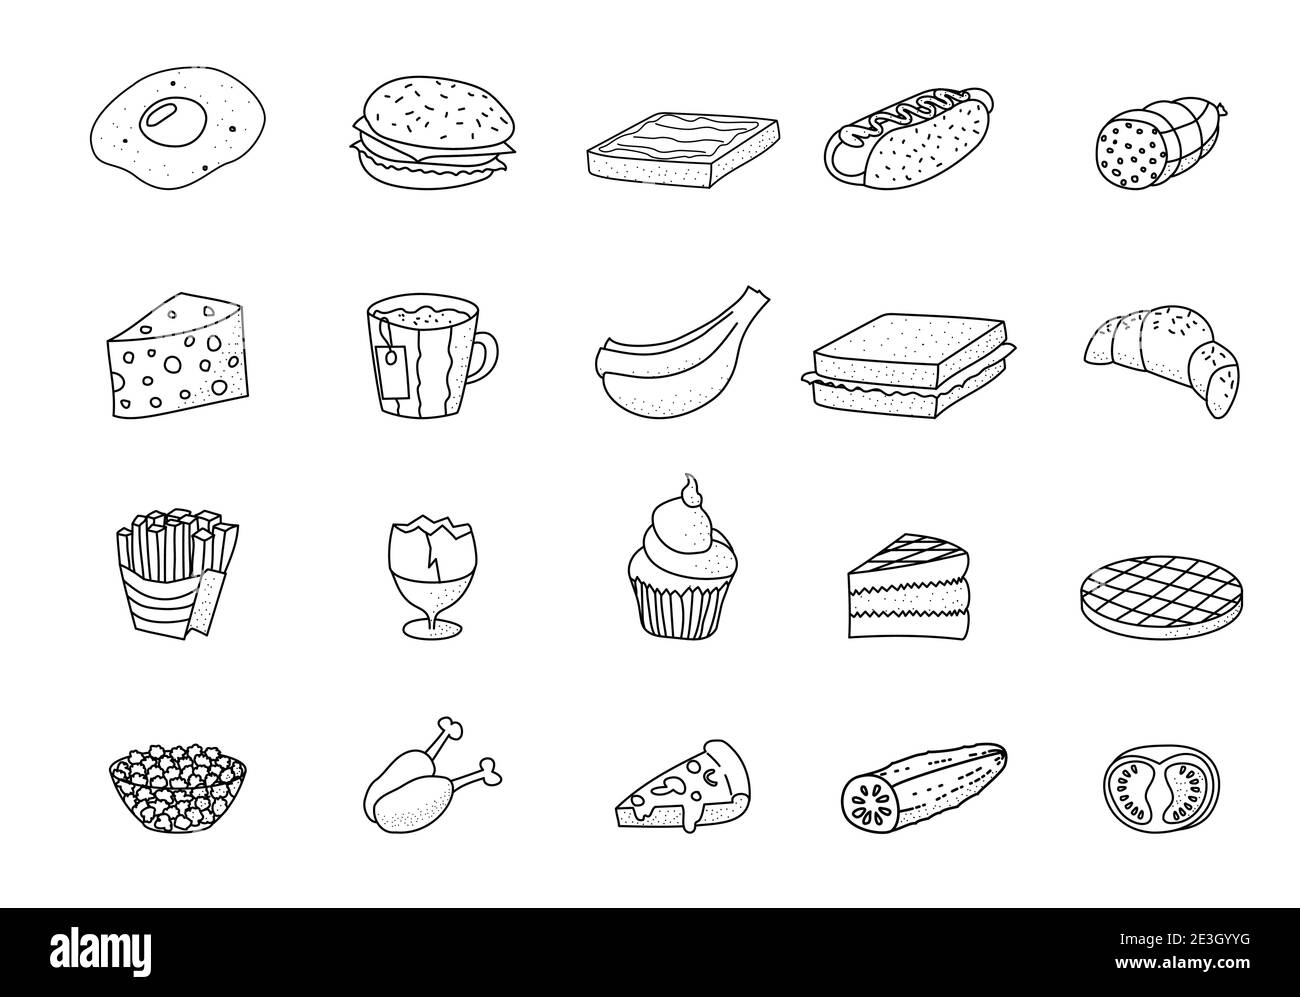 FoodFood doodle icons set vector illustration for web, kitchen wear wallpaper Stock Vector